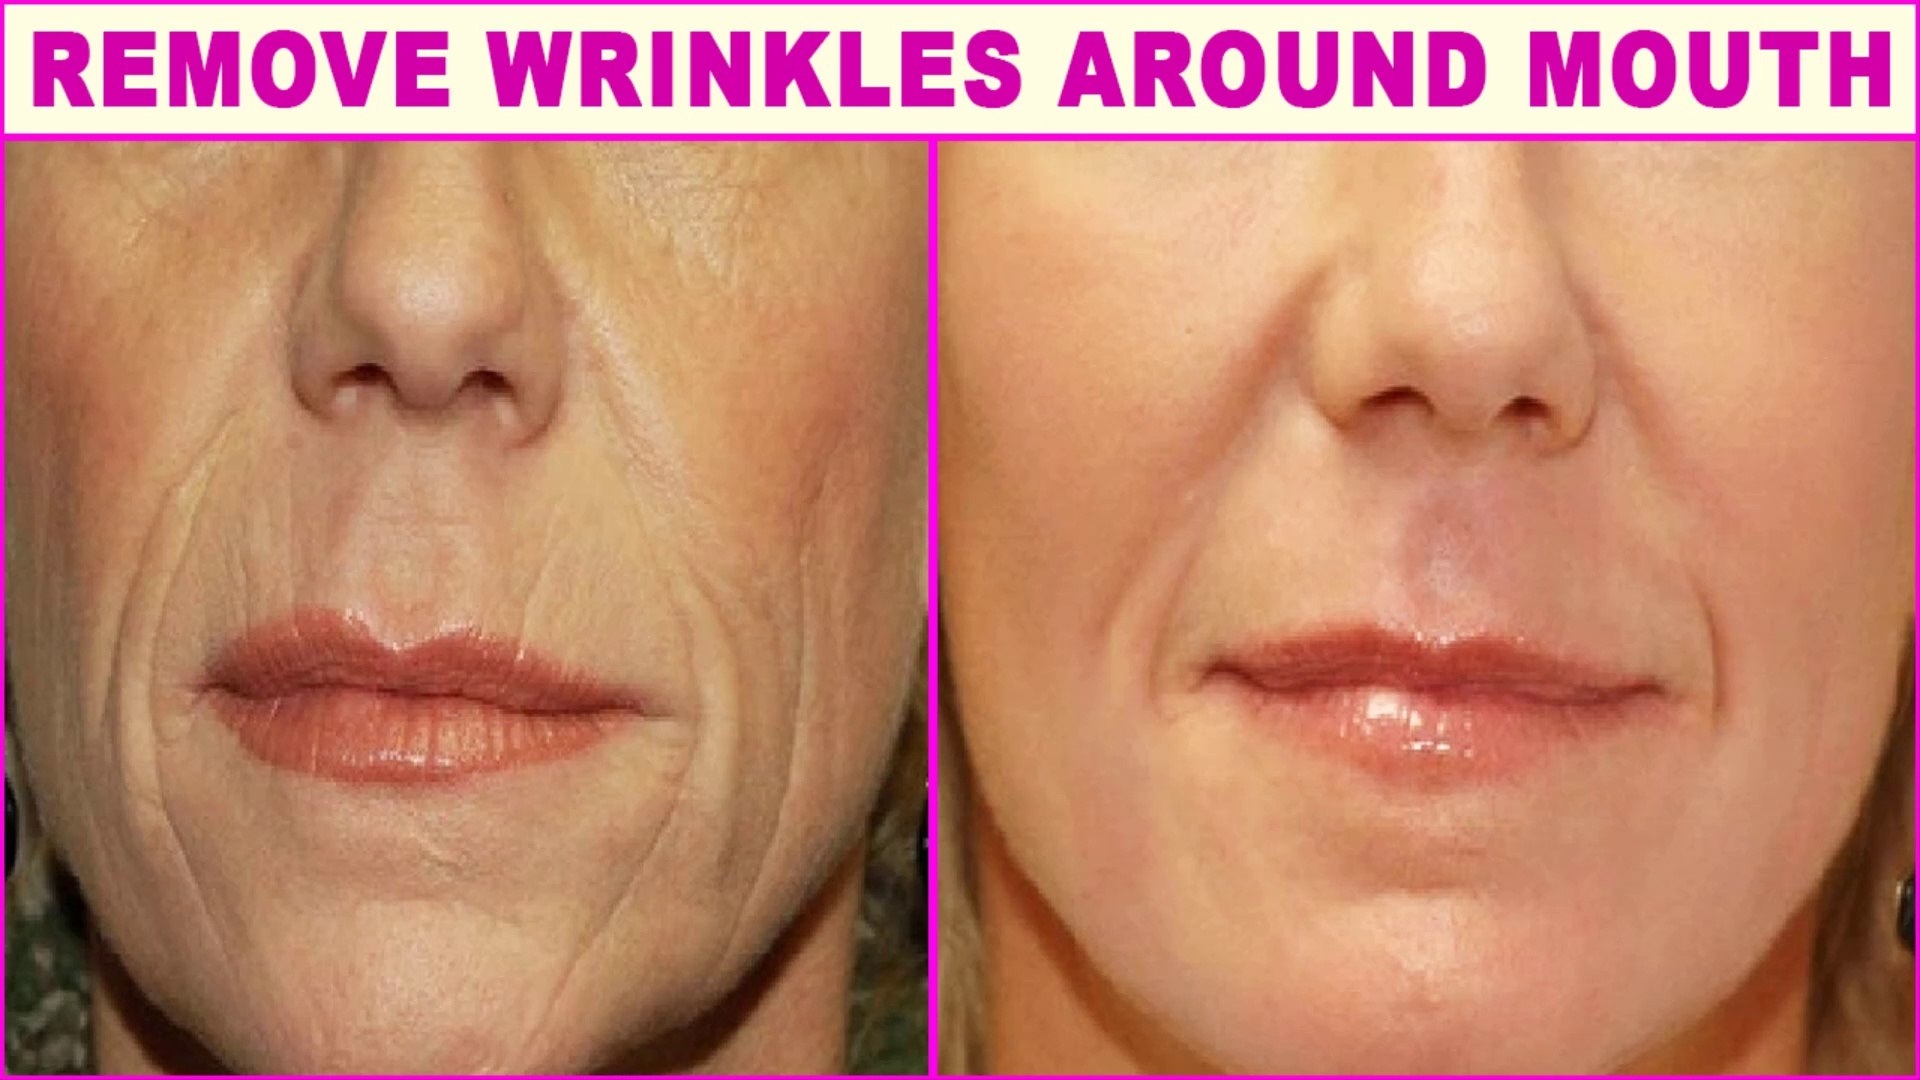 how to get rid of wrinkles around mouth naturally